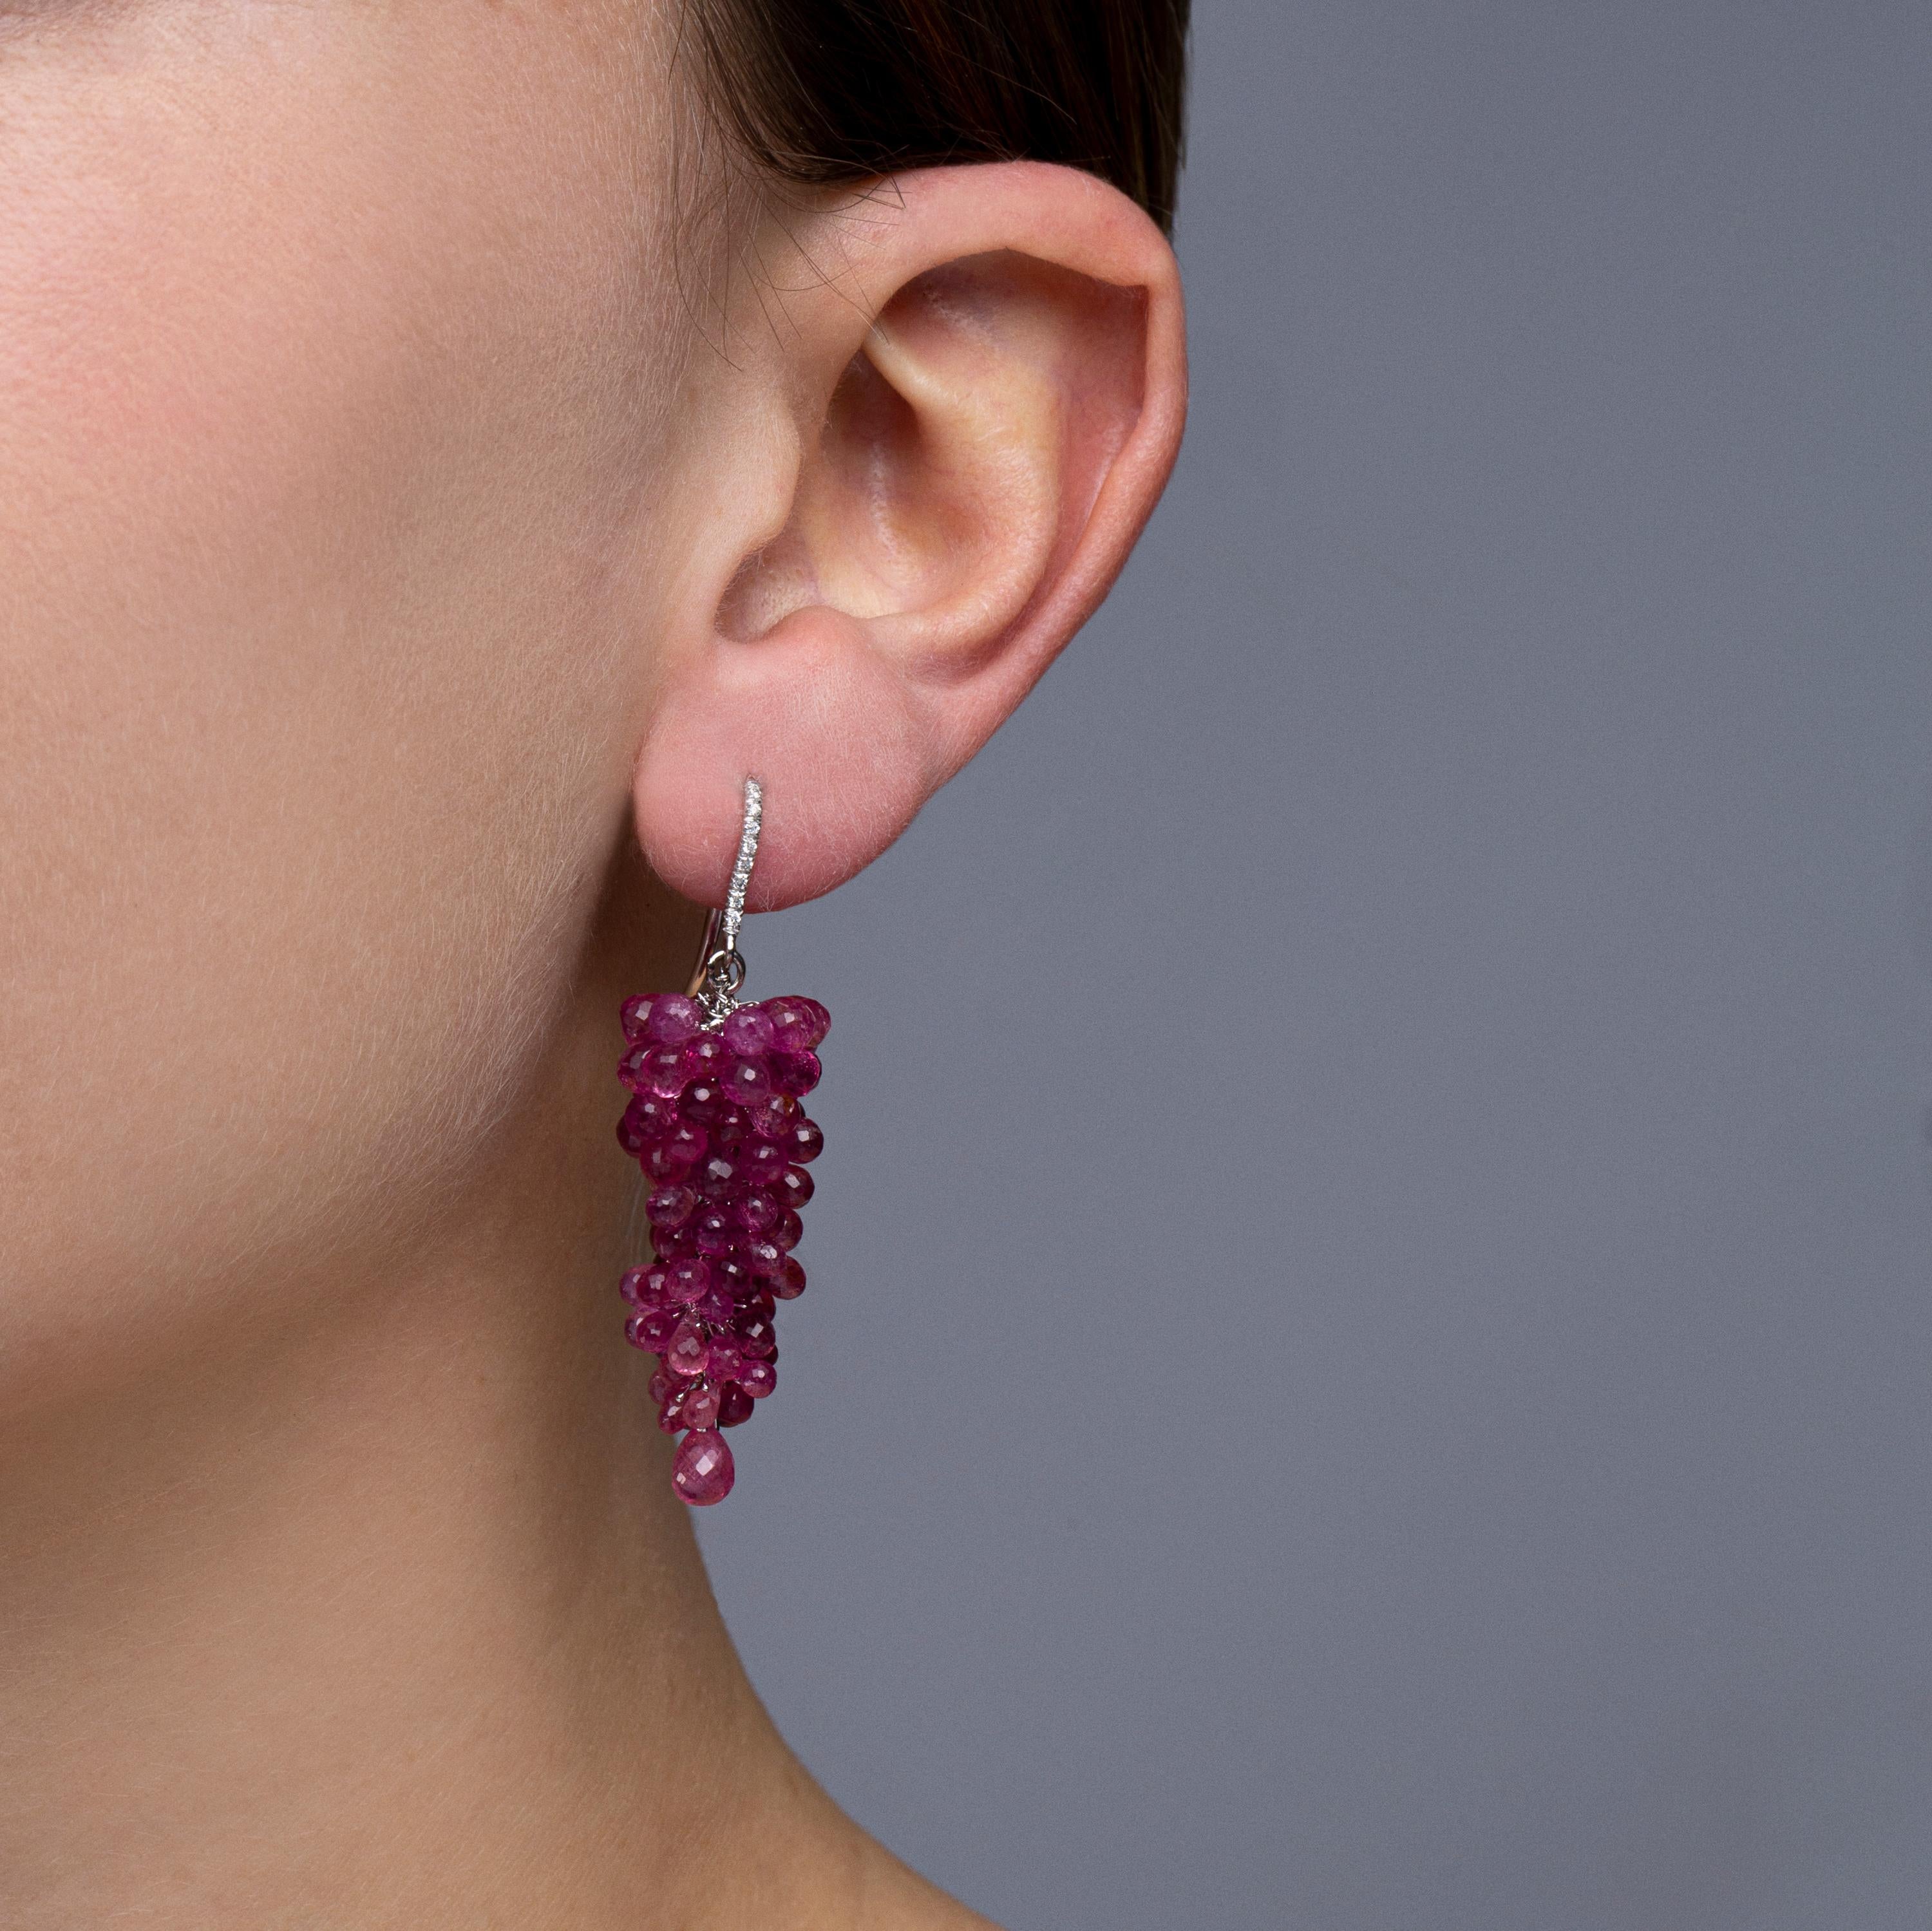 Alex Jona one-of-a-kind, hand crafted in Italy, 18 karat white gold pendant earrings, featuring two cluster of briolette cut Rubellite weighing 68.30 carats and set with 0.11 carats of white diamonds. Dimensions: H x 53.84mm, W x 16.76mm / H x